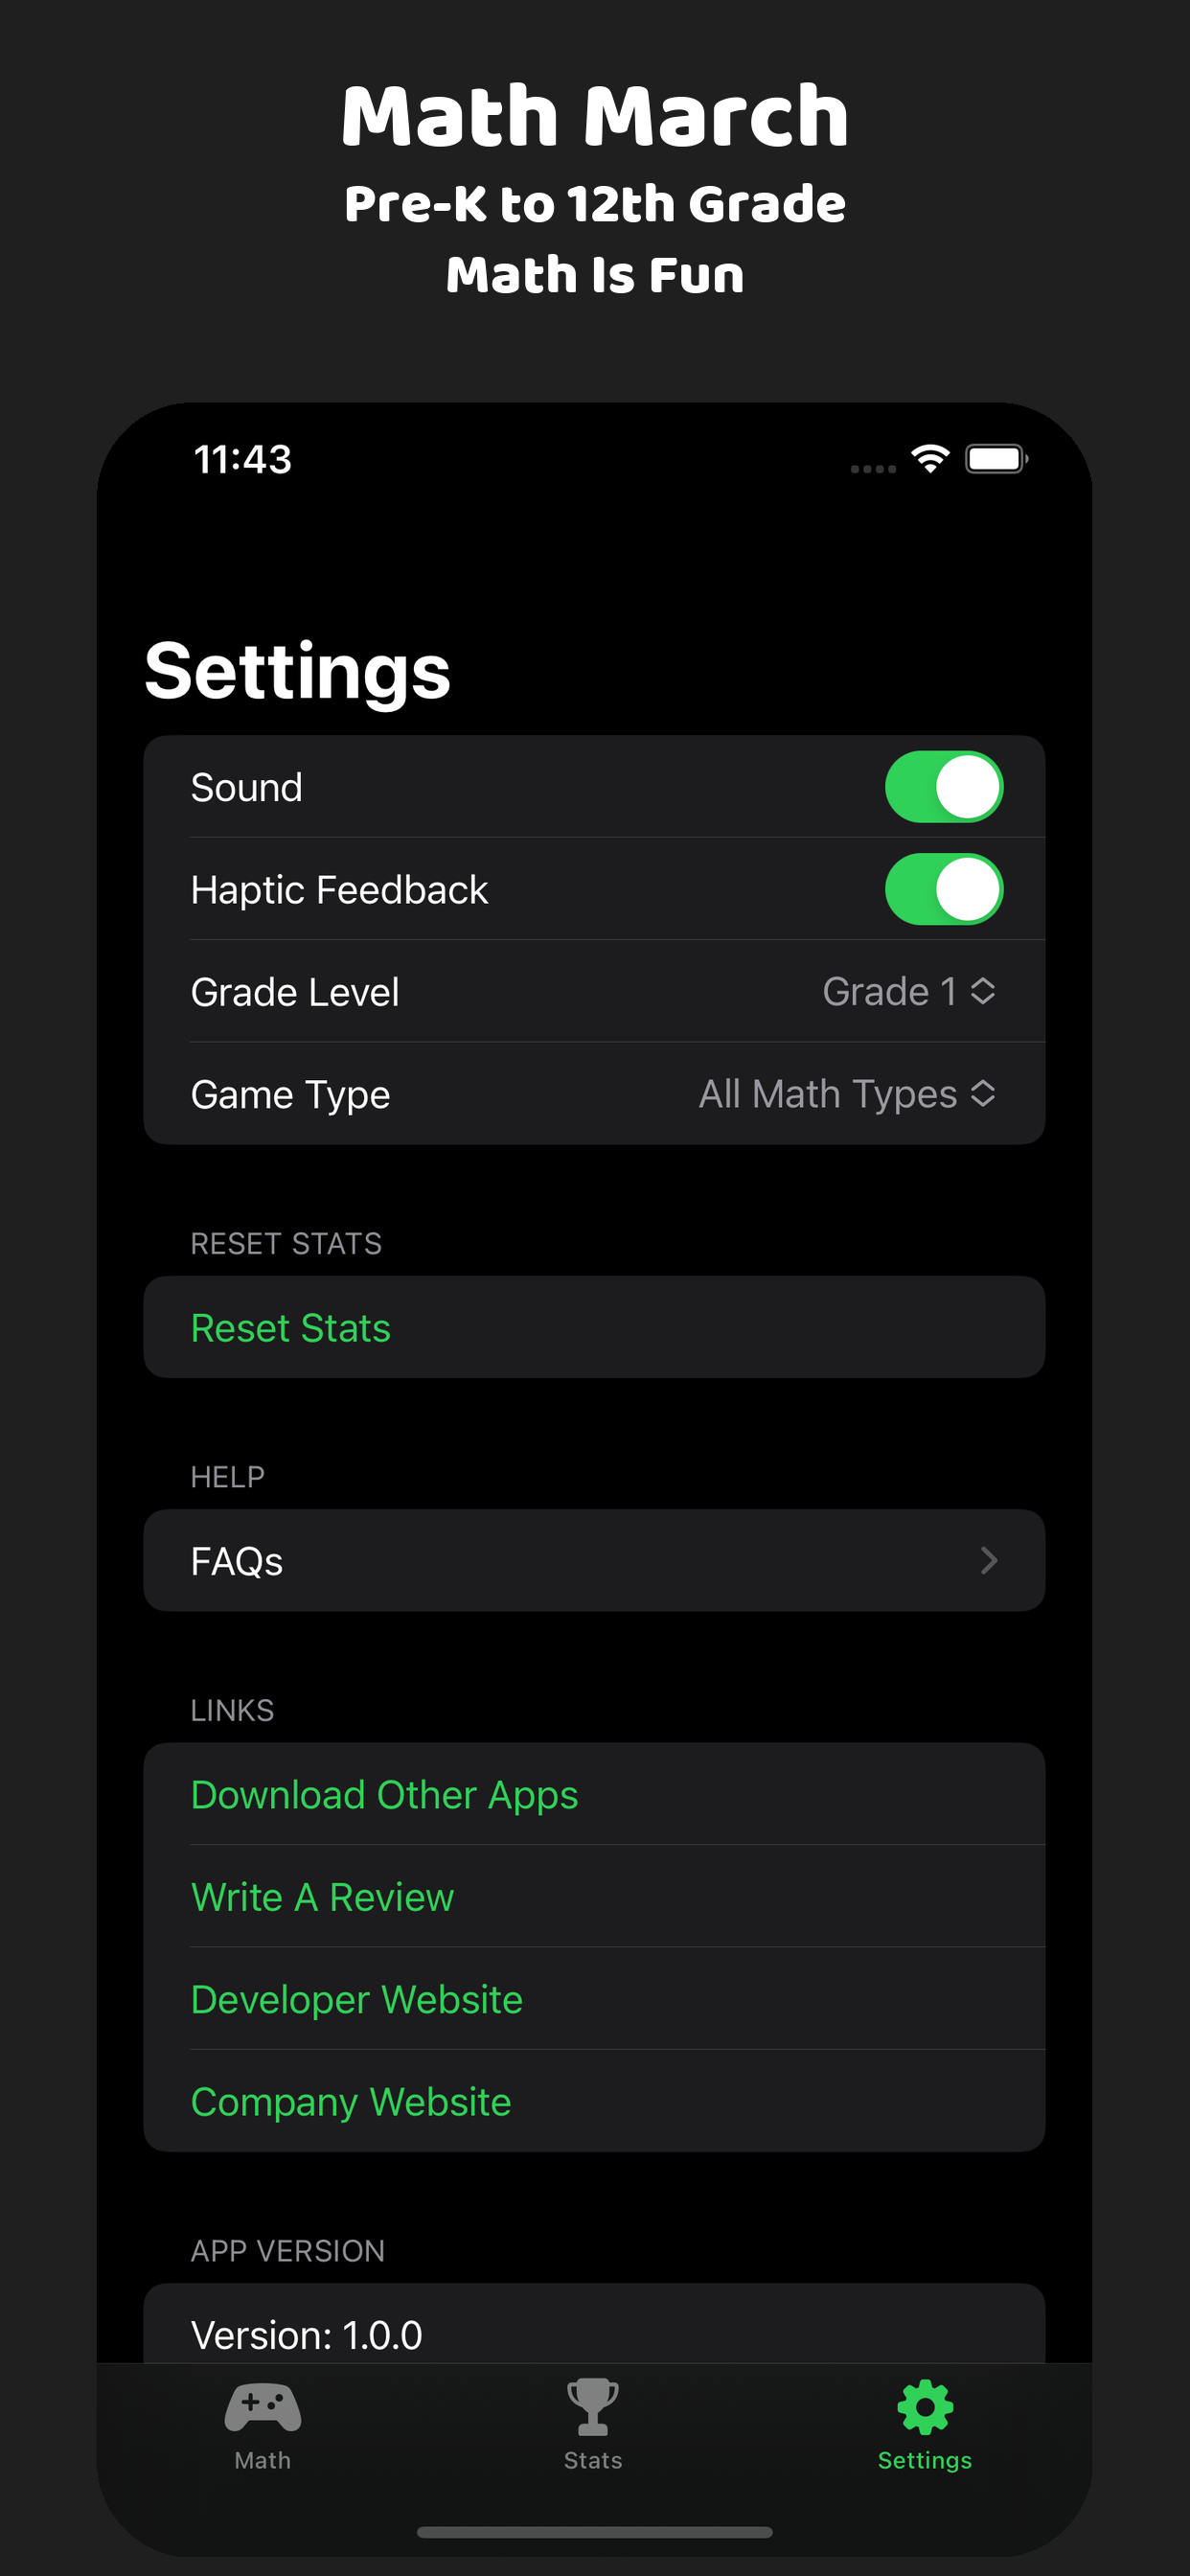 Math March for iOS by Eric David Smith